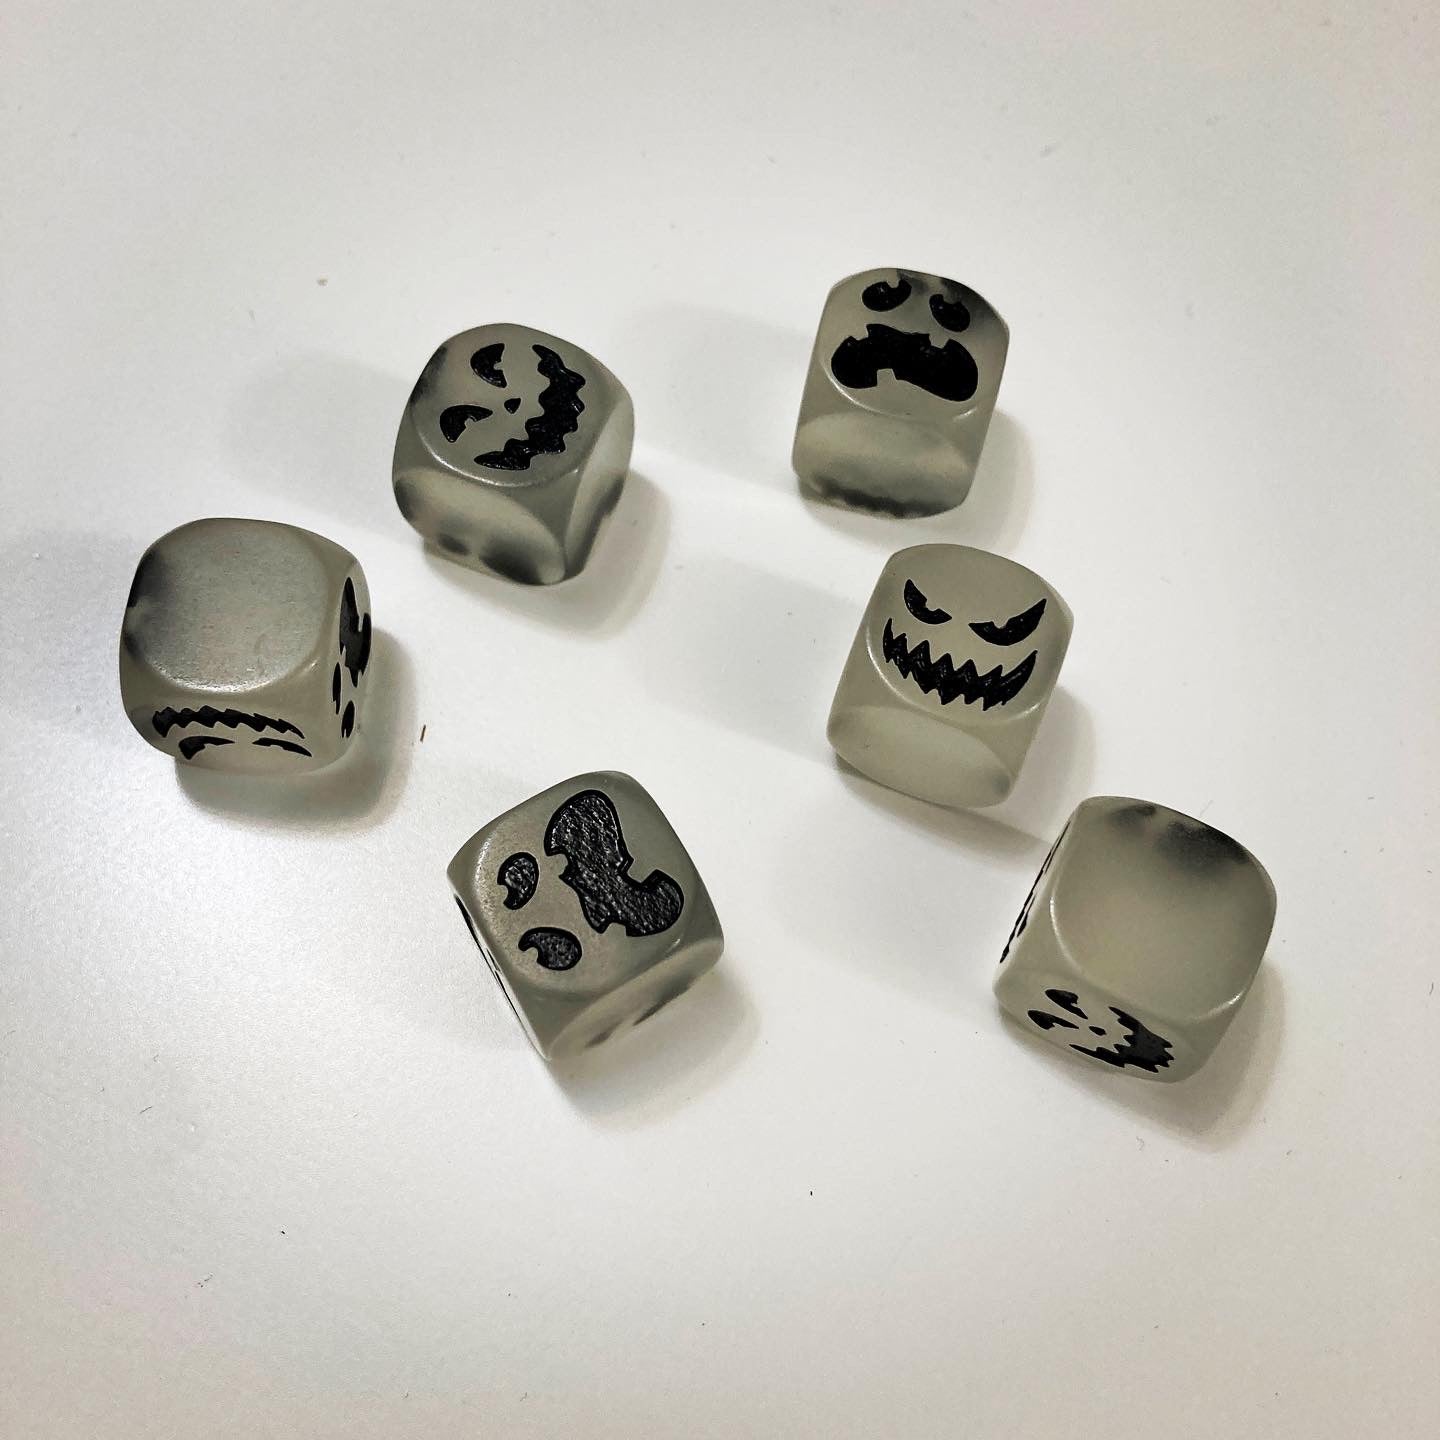 Don't go in there Kickstarter edition dice